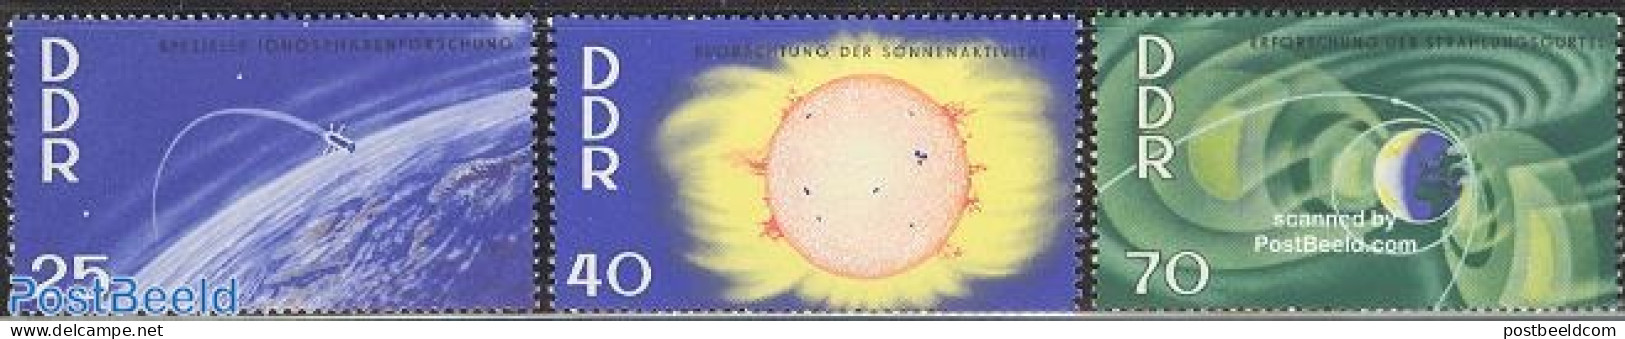 Germany, DDR 1964 QUIET SUN YEAR 3V, Mint NH, Science - Astronomy - Ongebruikt